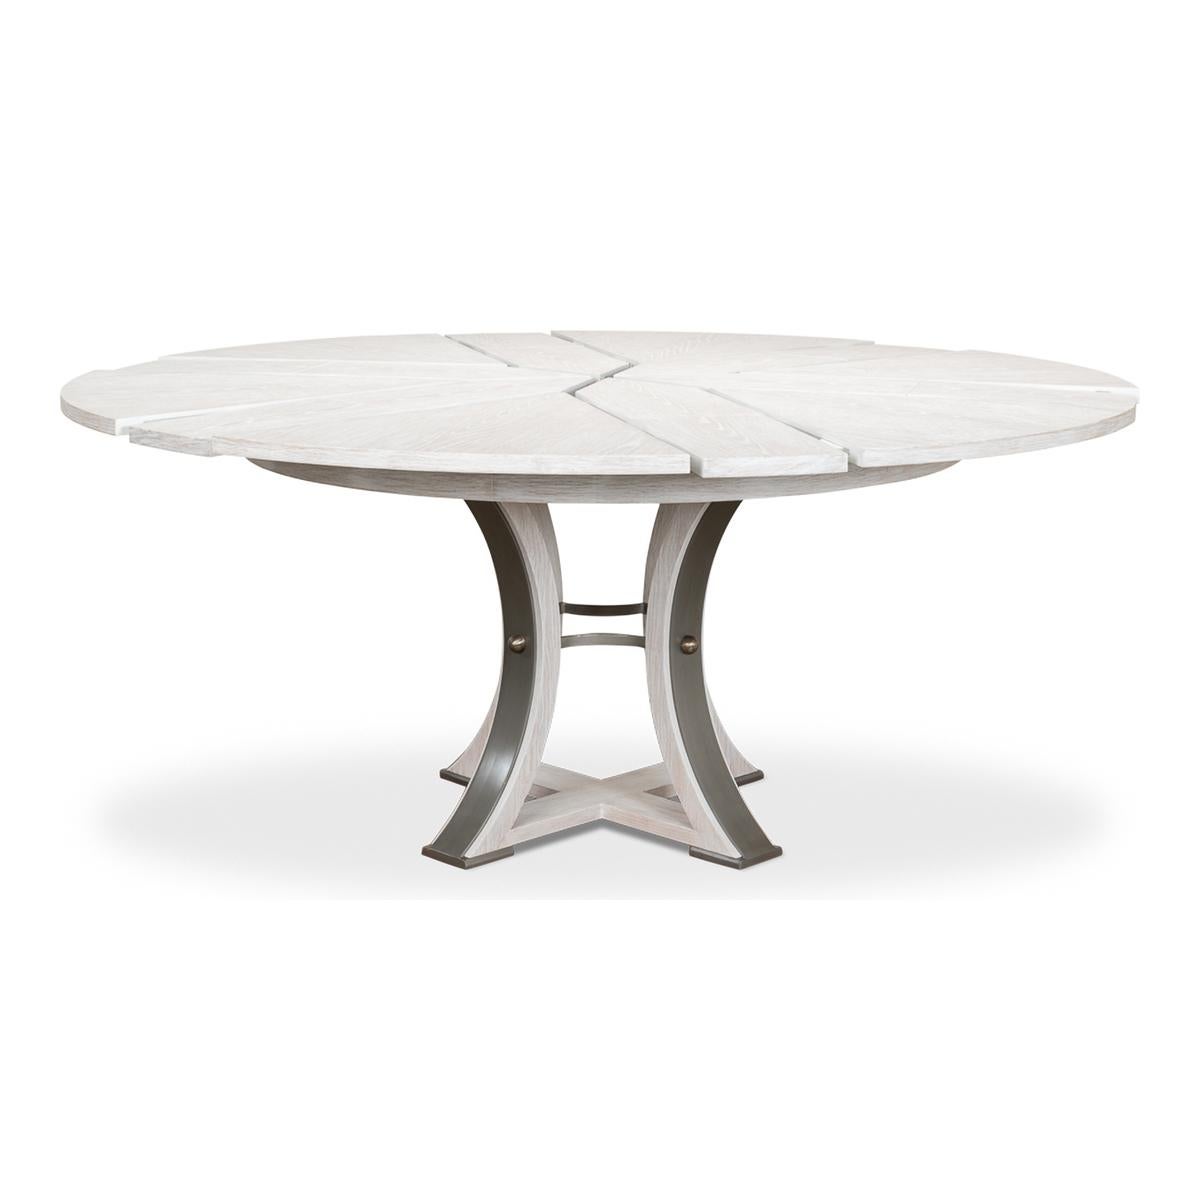 Contemporary Modern Industrial Dining Table - 70 - White For Sale